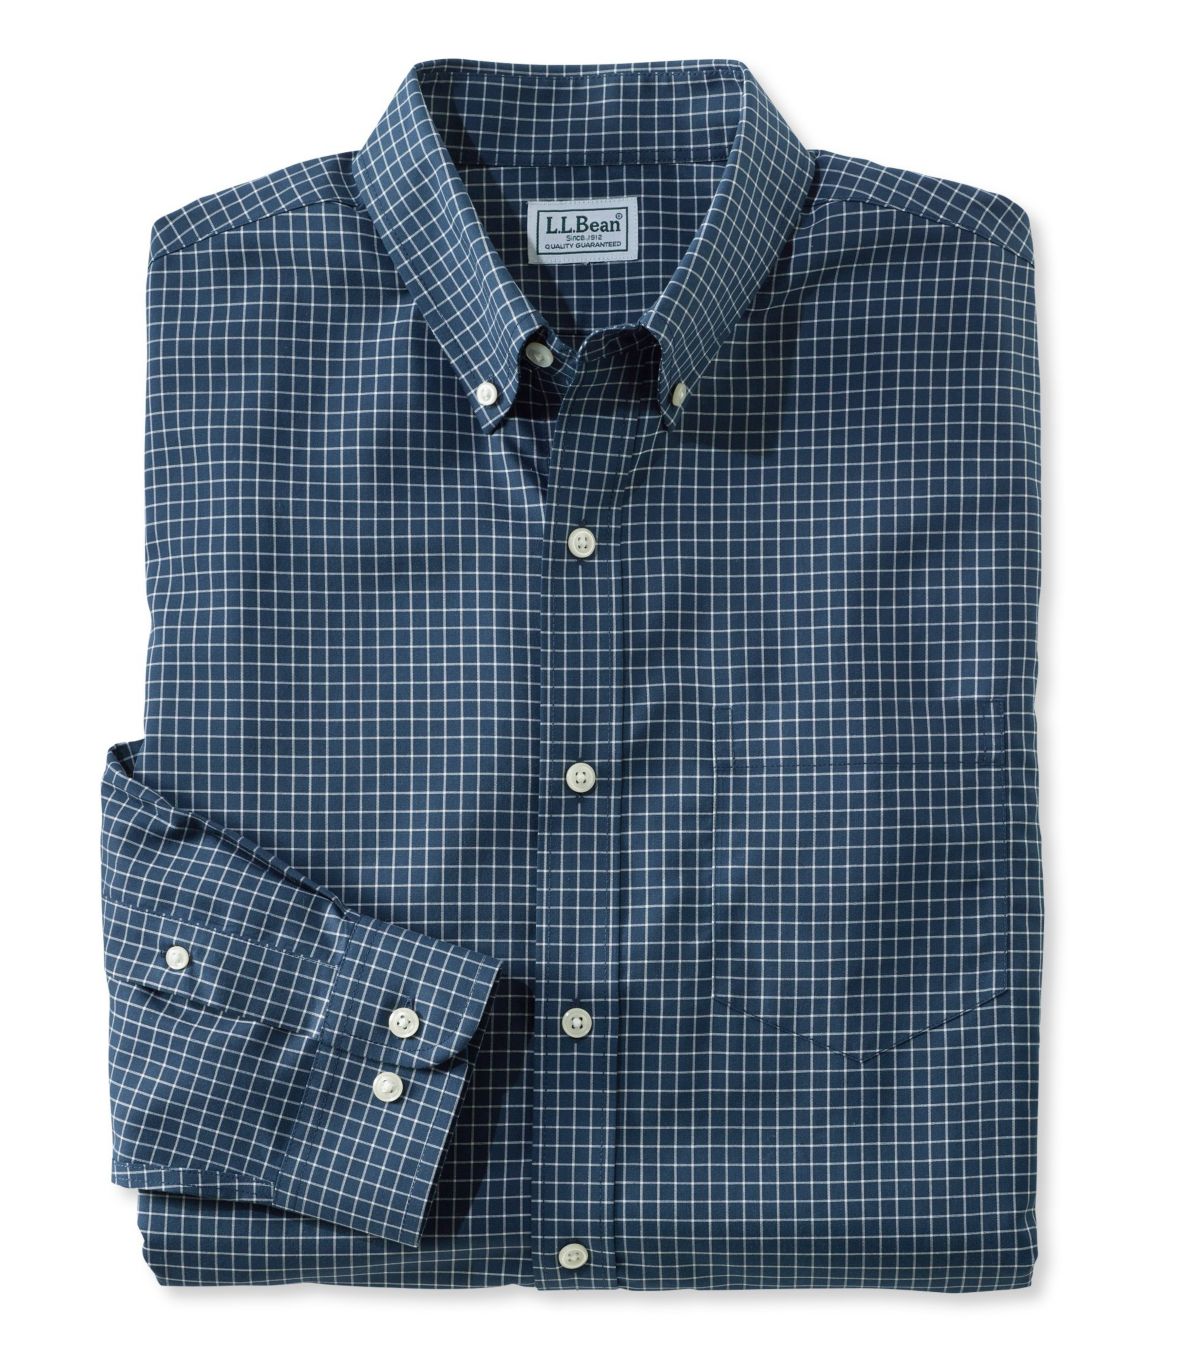 Men's Wrinkle-Free Check Shirt, Slightly Fitted